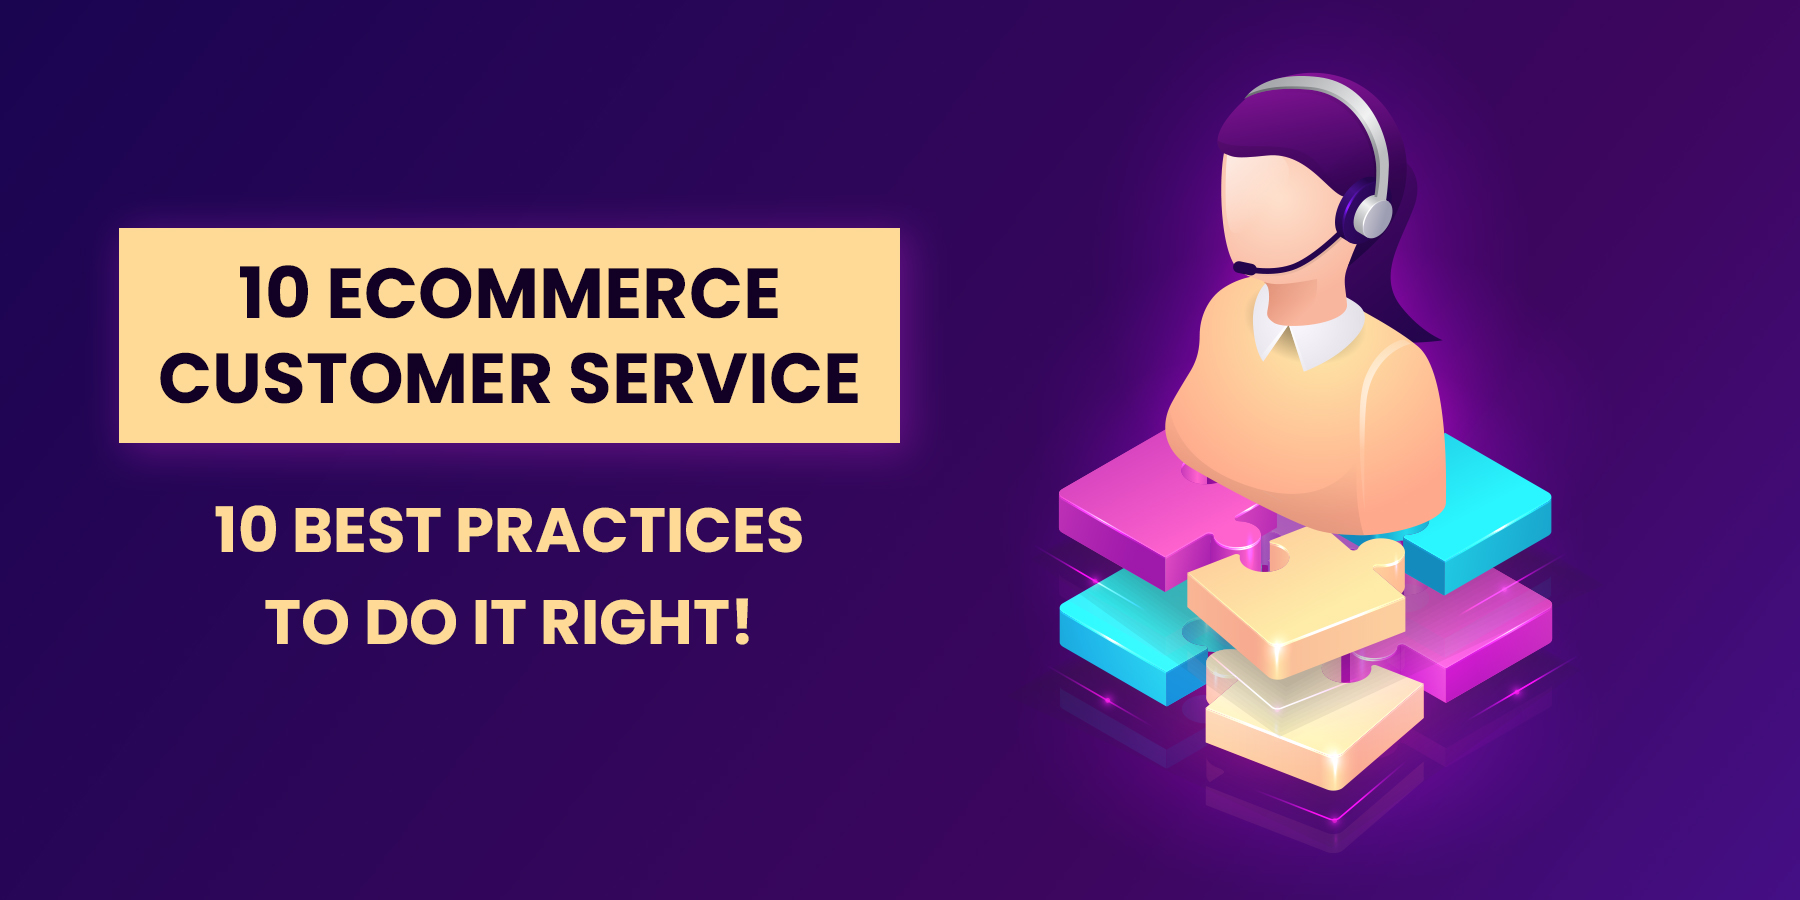 Ecommerce Customer Service 10 best practices to do it right!